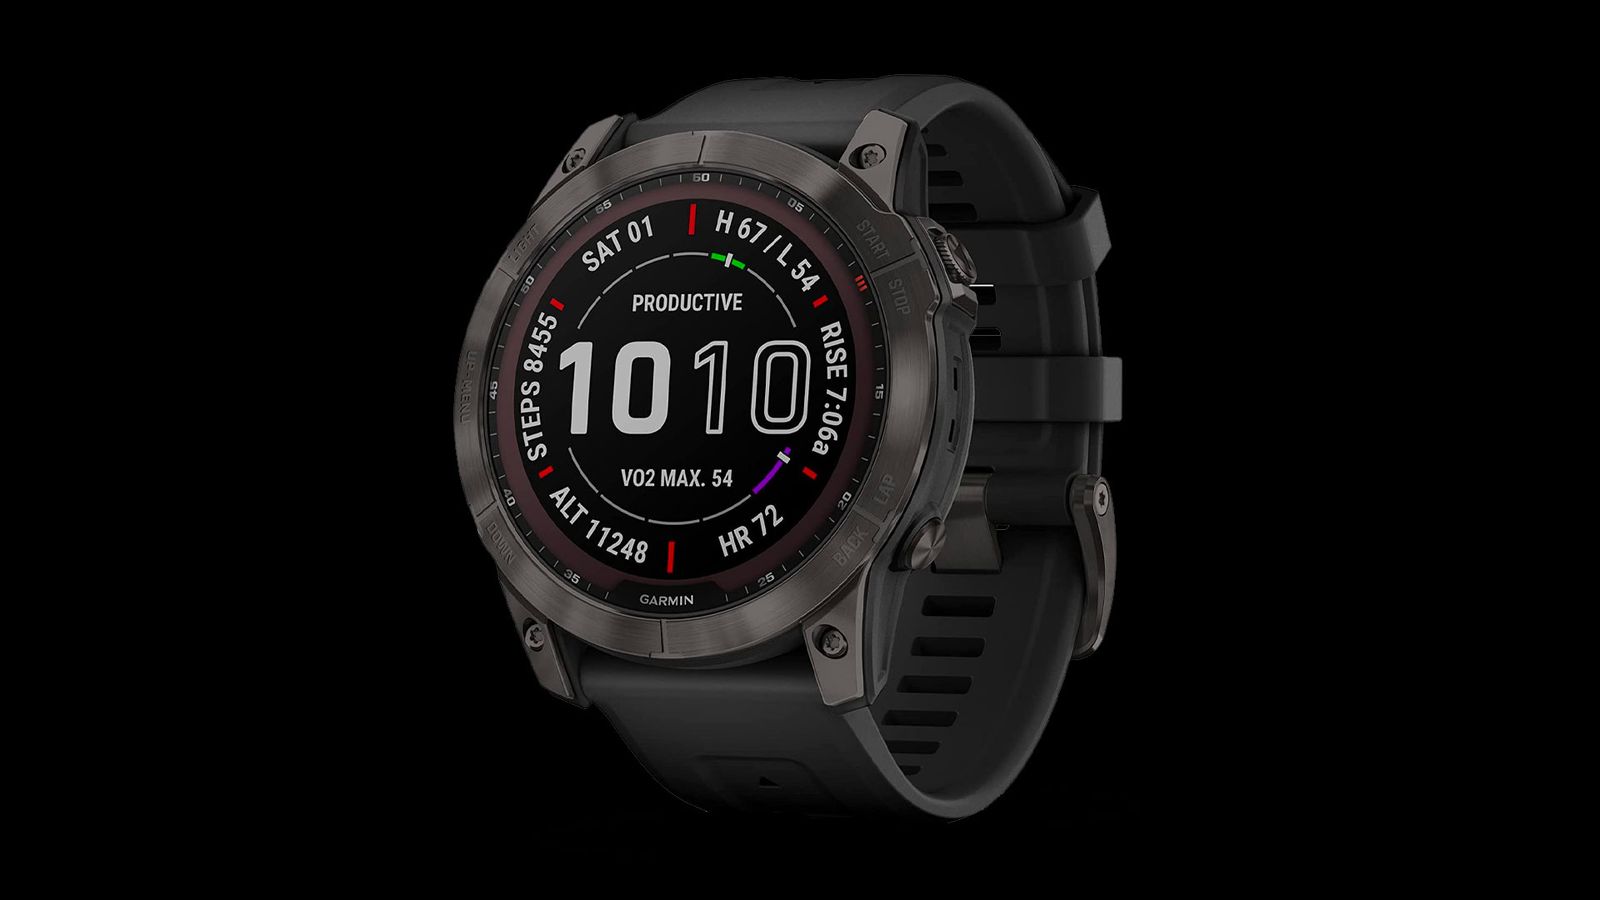 Garmin fēnix 7X Sapphire Solar Edition product image of a carbon grey smartwatch featuring a black strap and red details on the display.